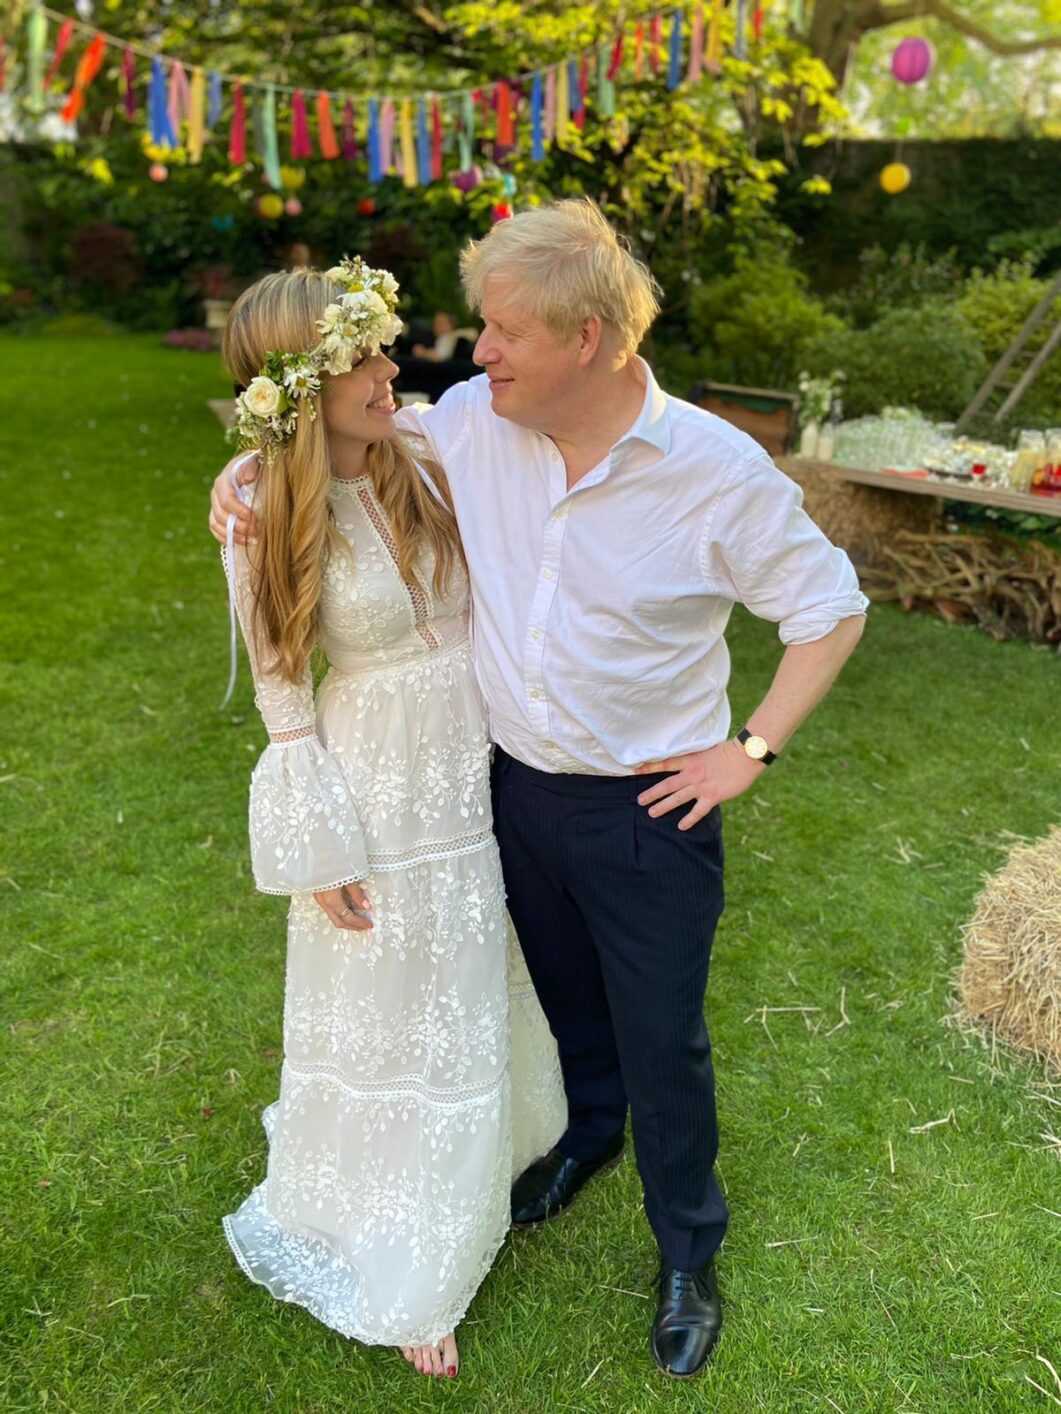 Carrie Johnson wore a rented wedding dress for her marriage to Boris Johnson.